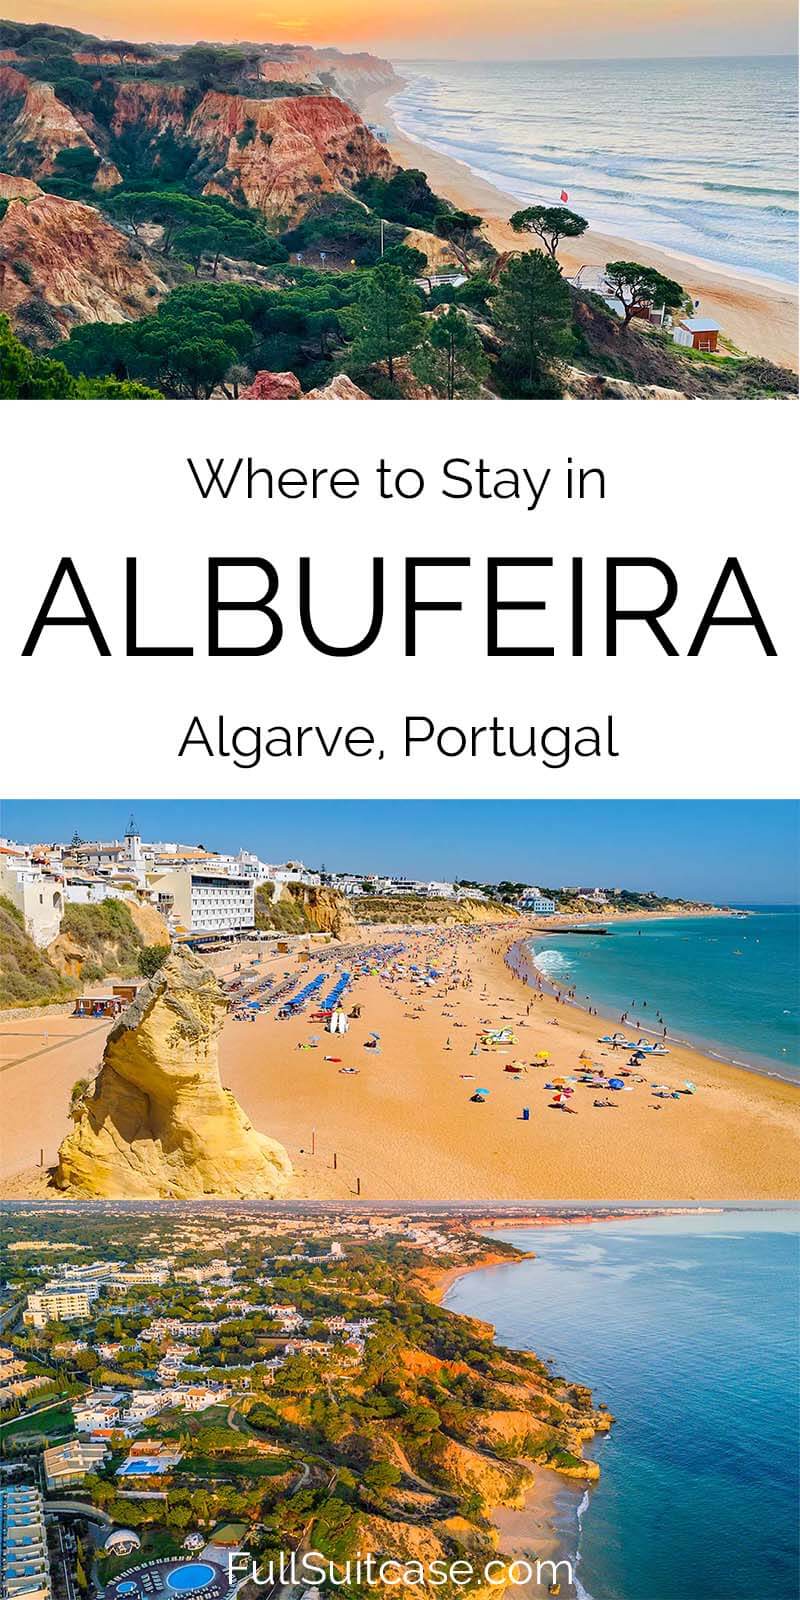 Where to stay in Albufeira (Algarve Portugal) - best areas and hotels